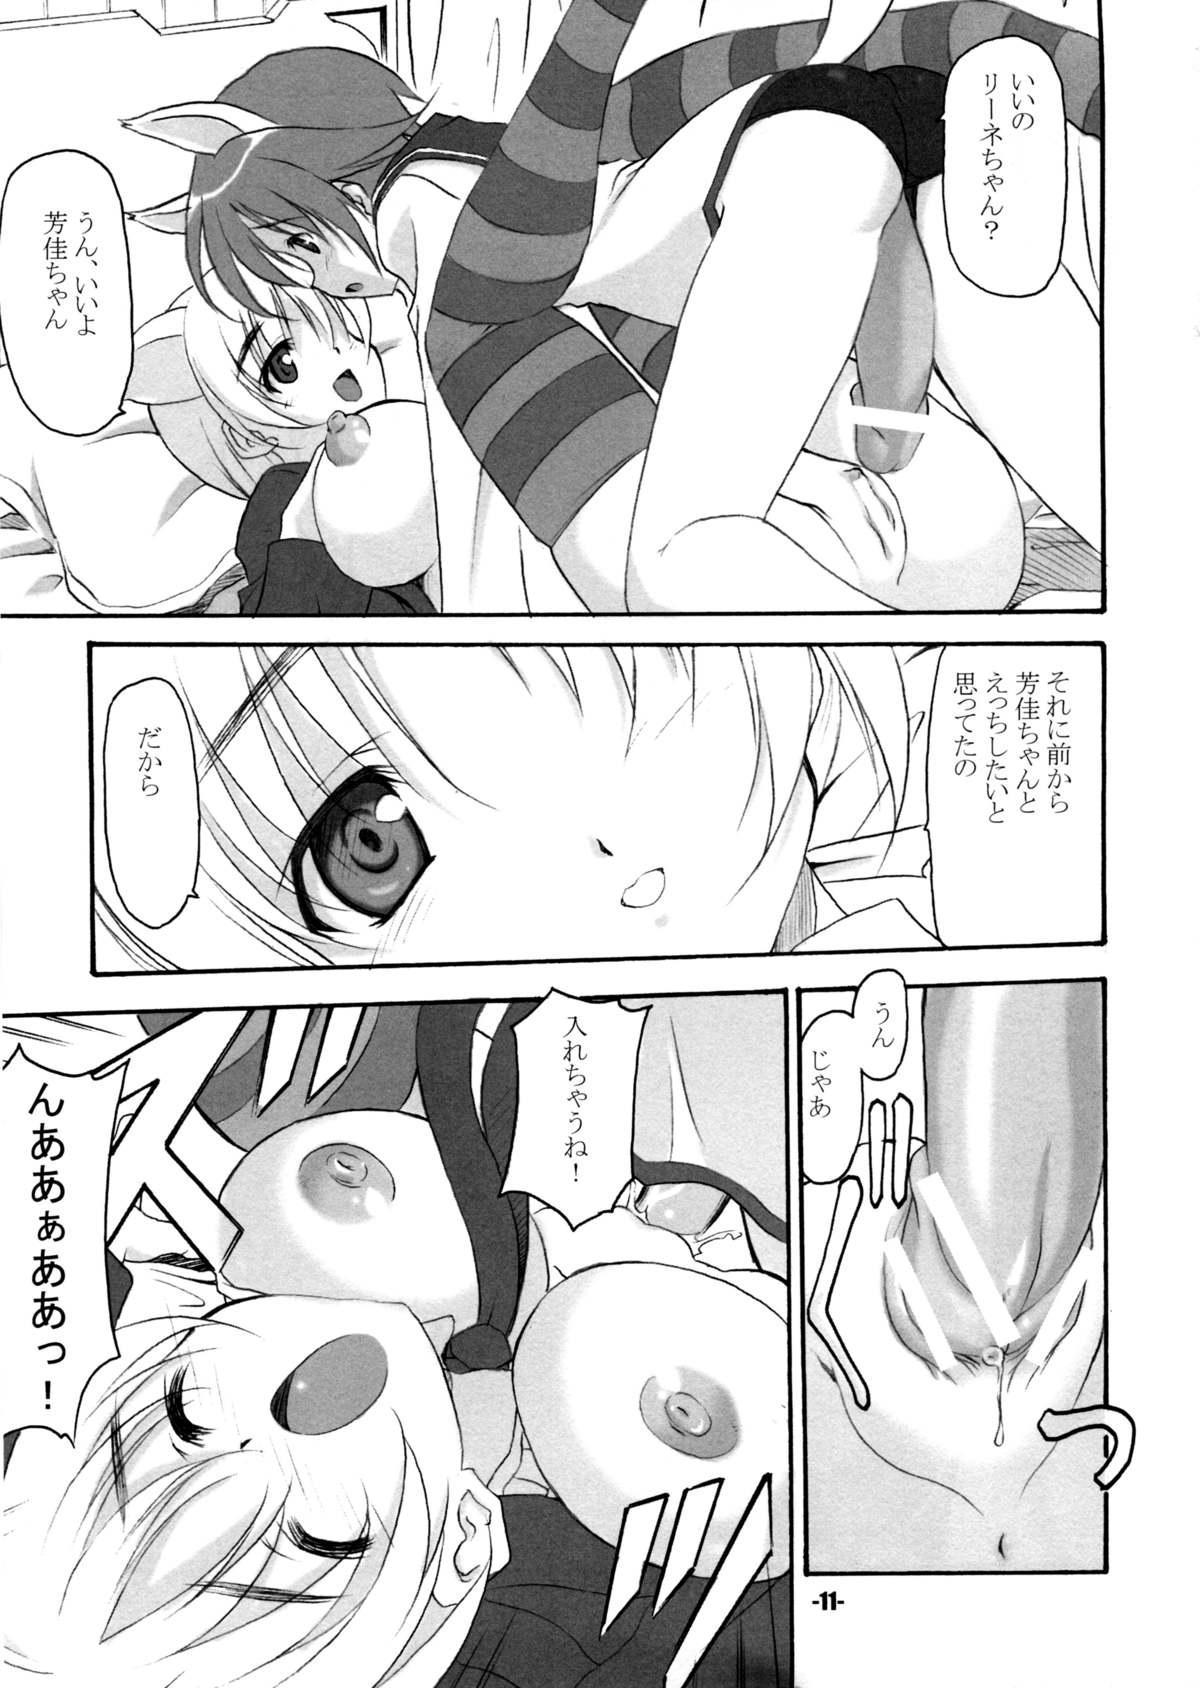 1080p P.H.N - Strike witches Bald Pussy - Page 11